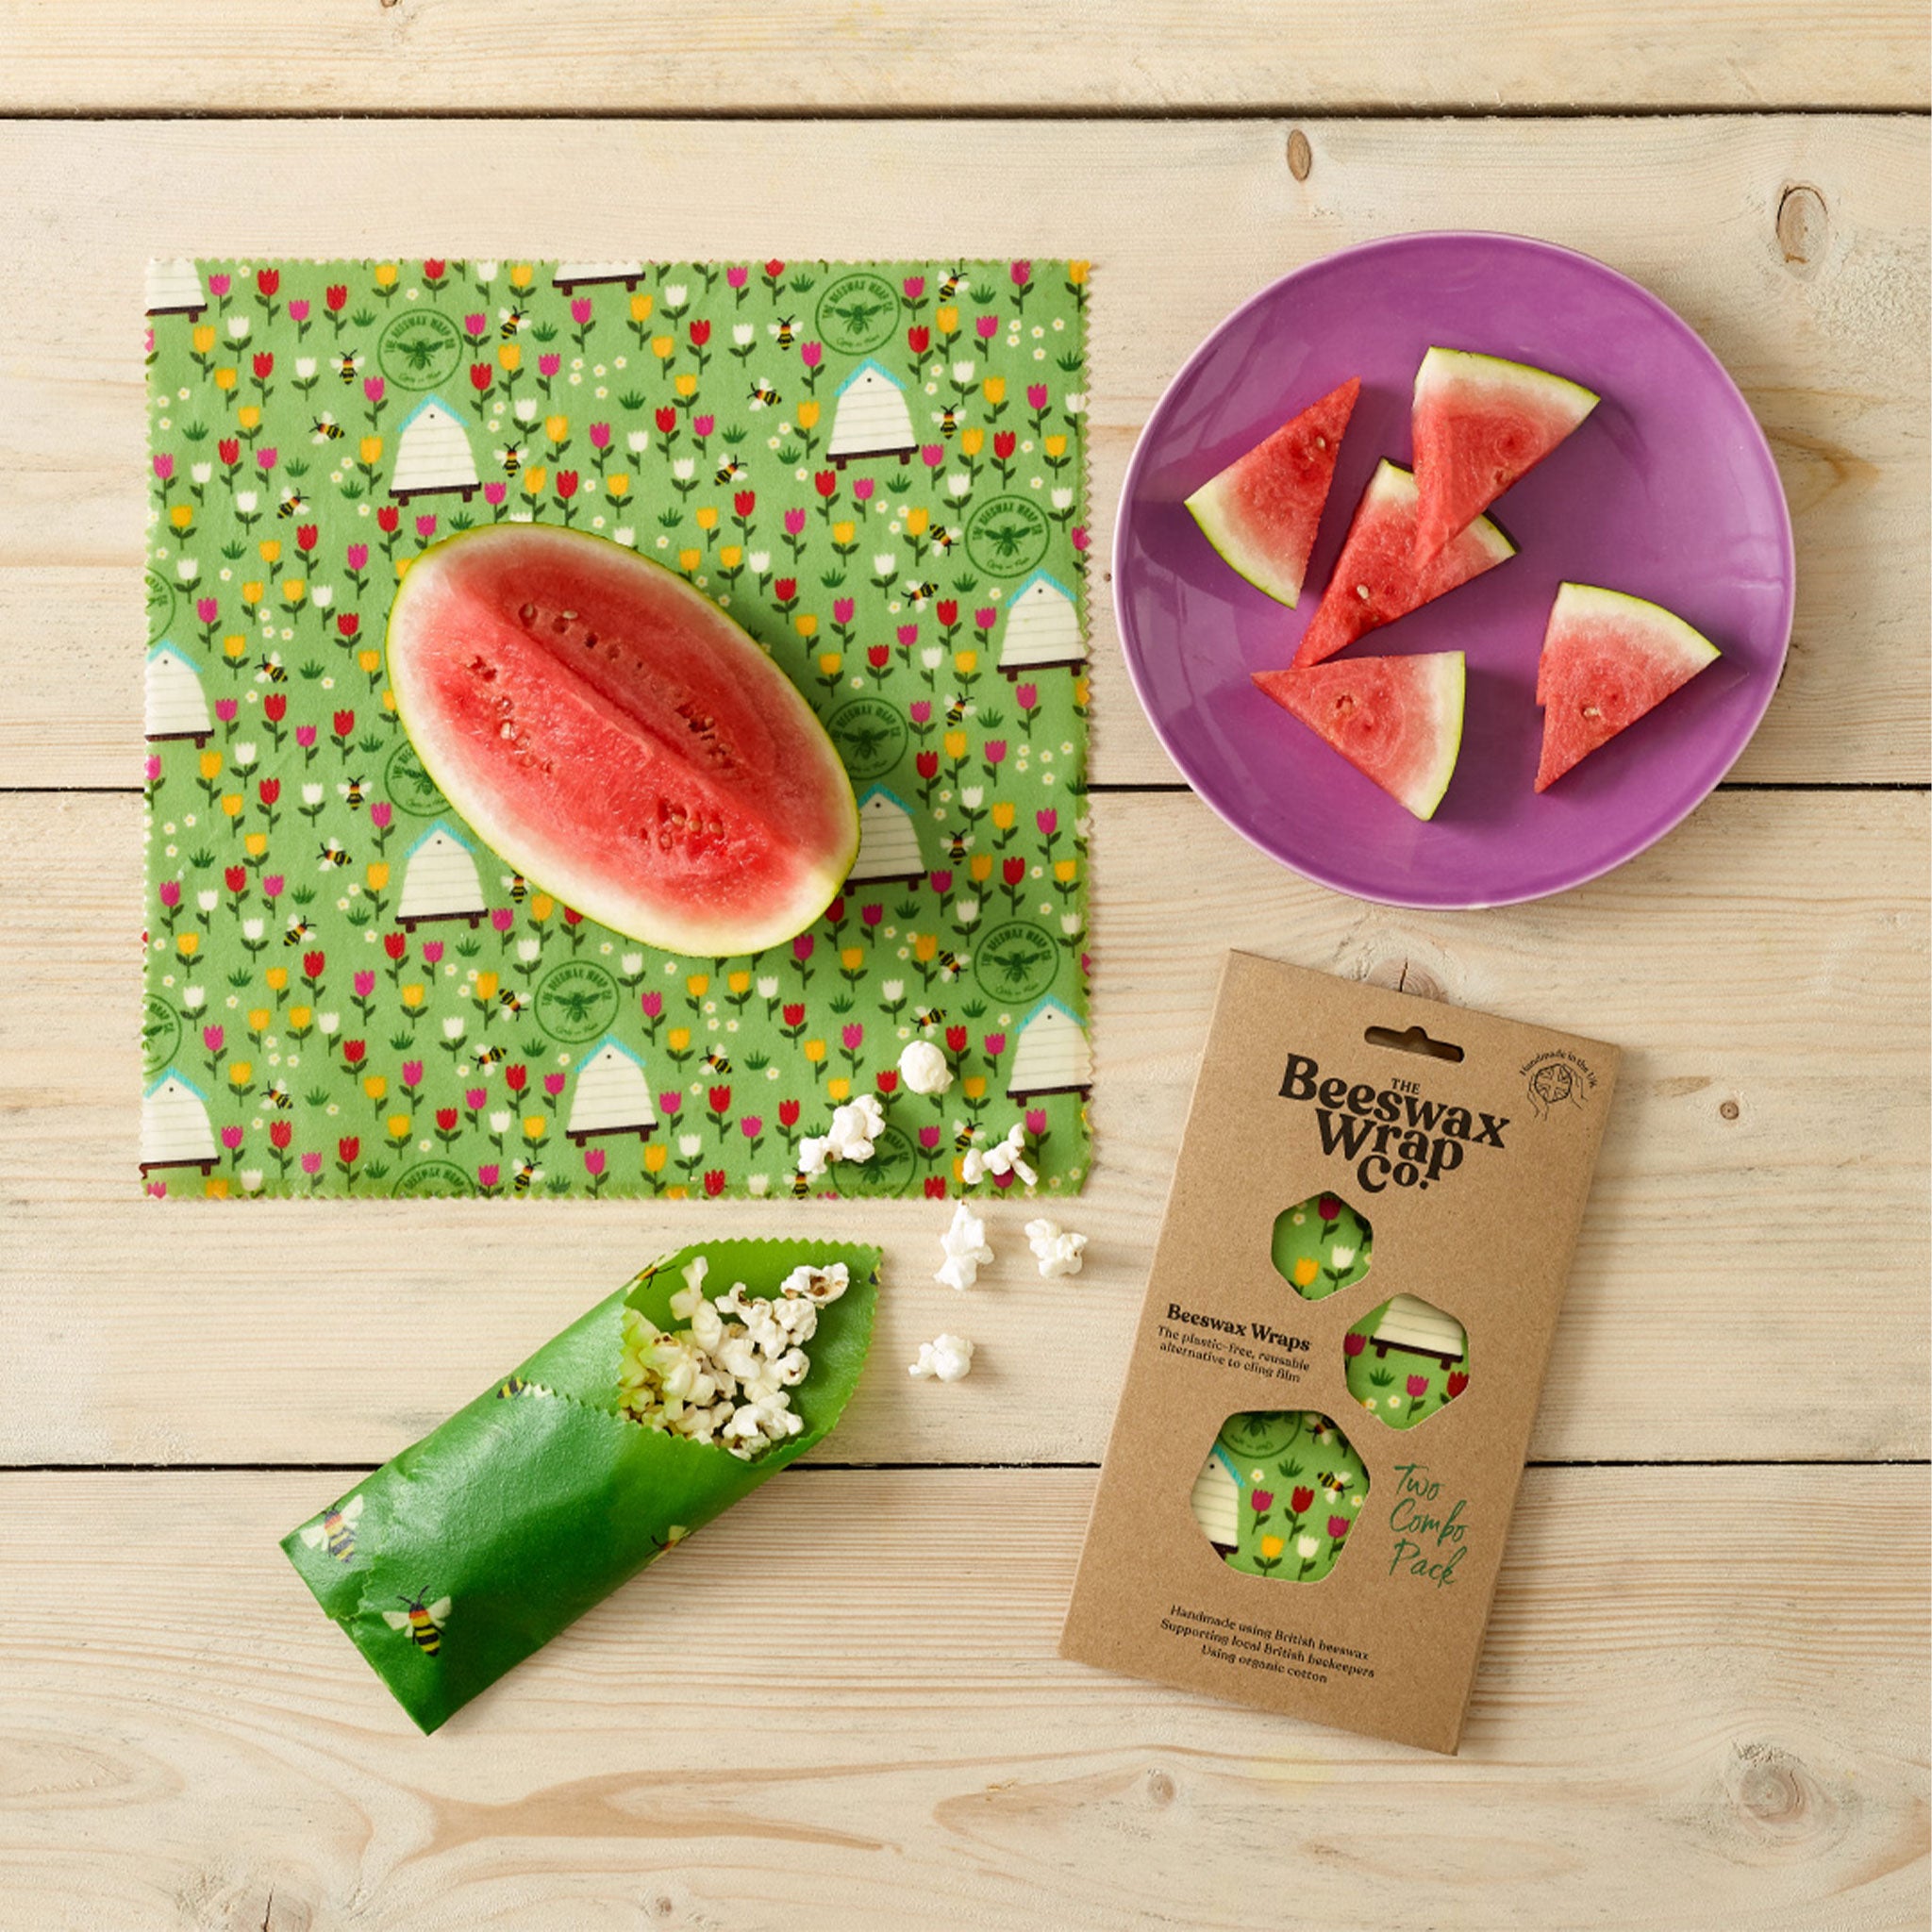 Lifestyle image of the Beeswrap combo pack being used to keep watermelon and popcorn fresh.